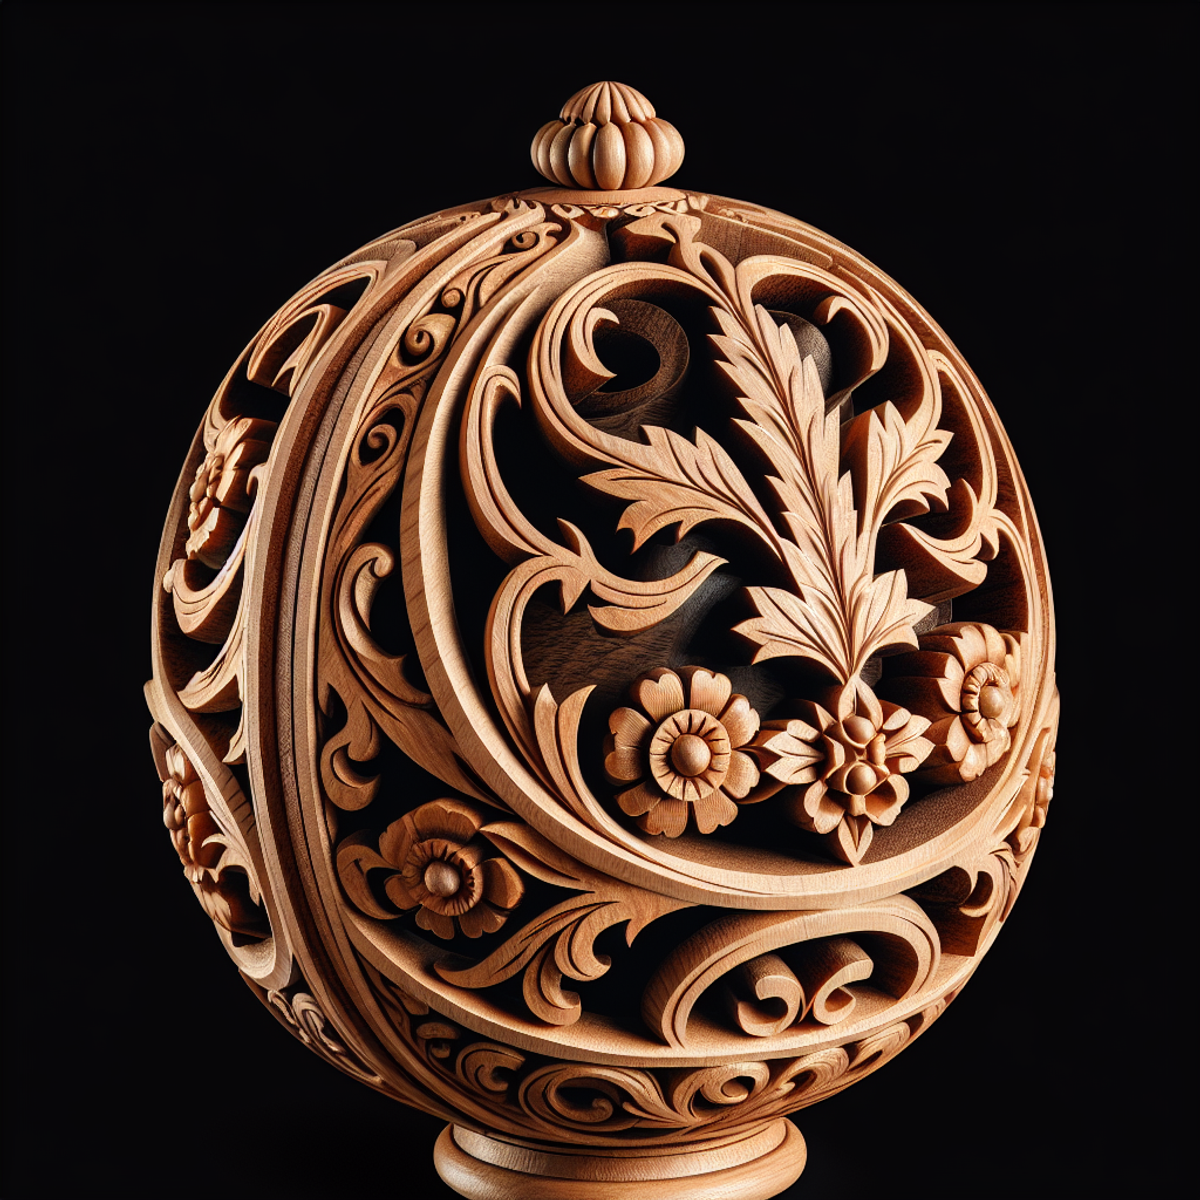 A vintage wooden decorative object with intricate carvings.